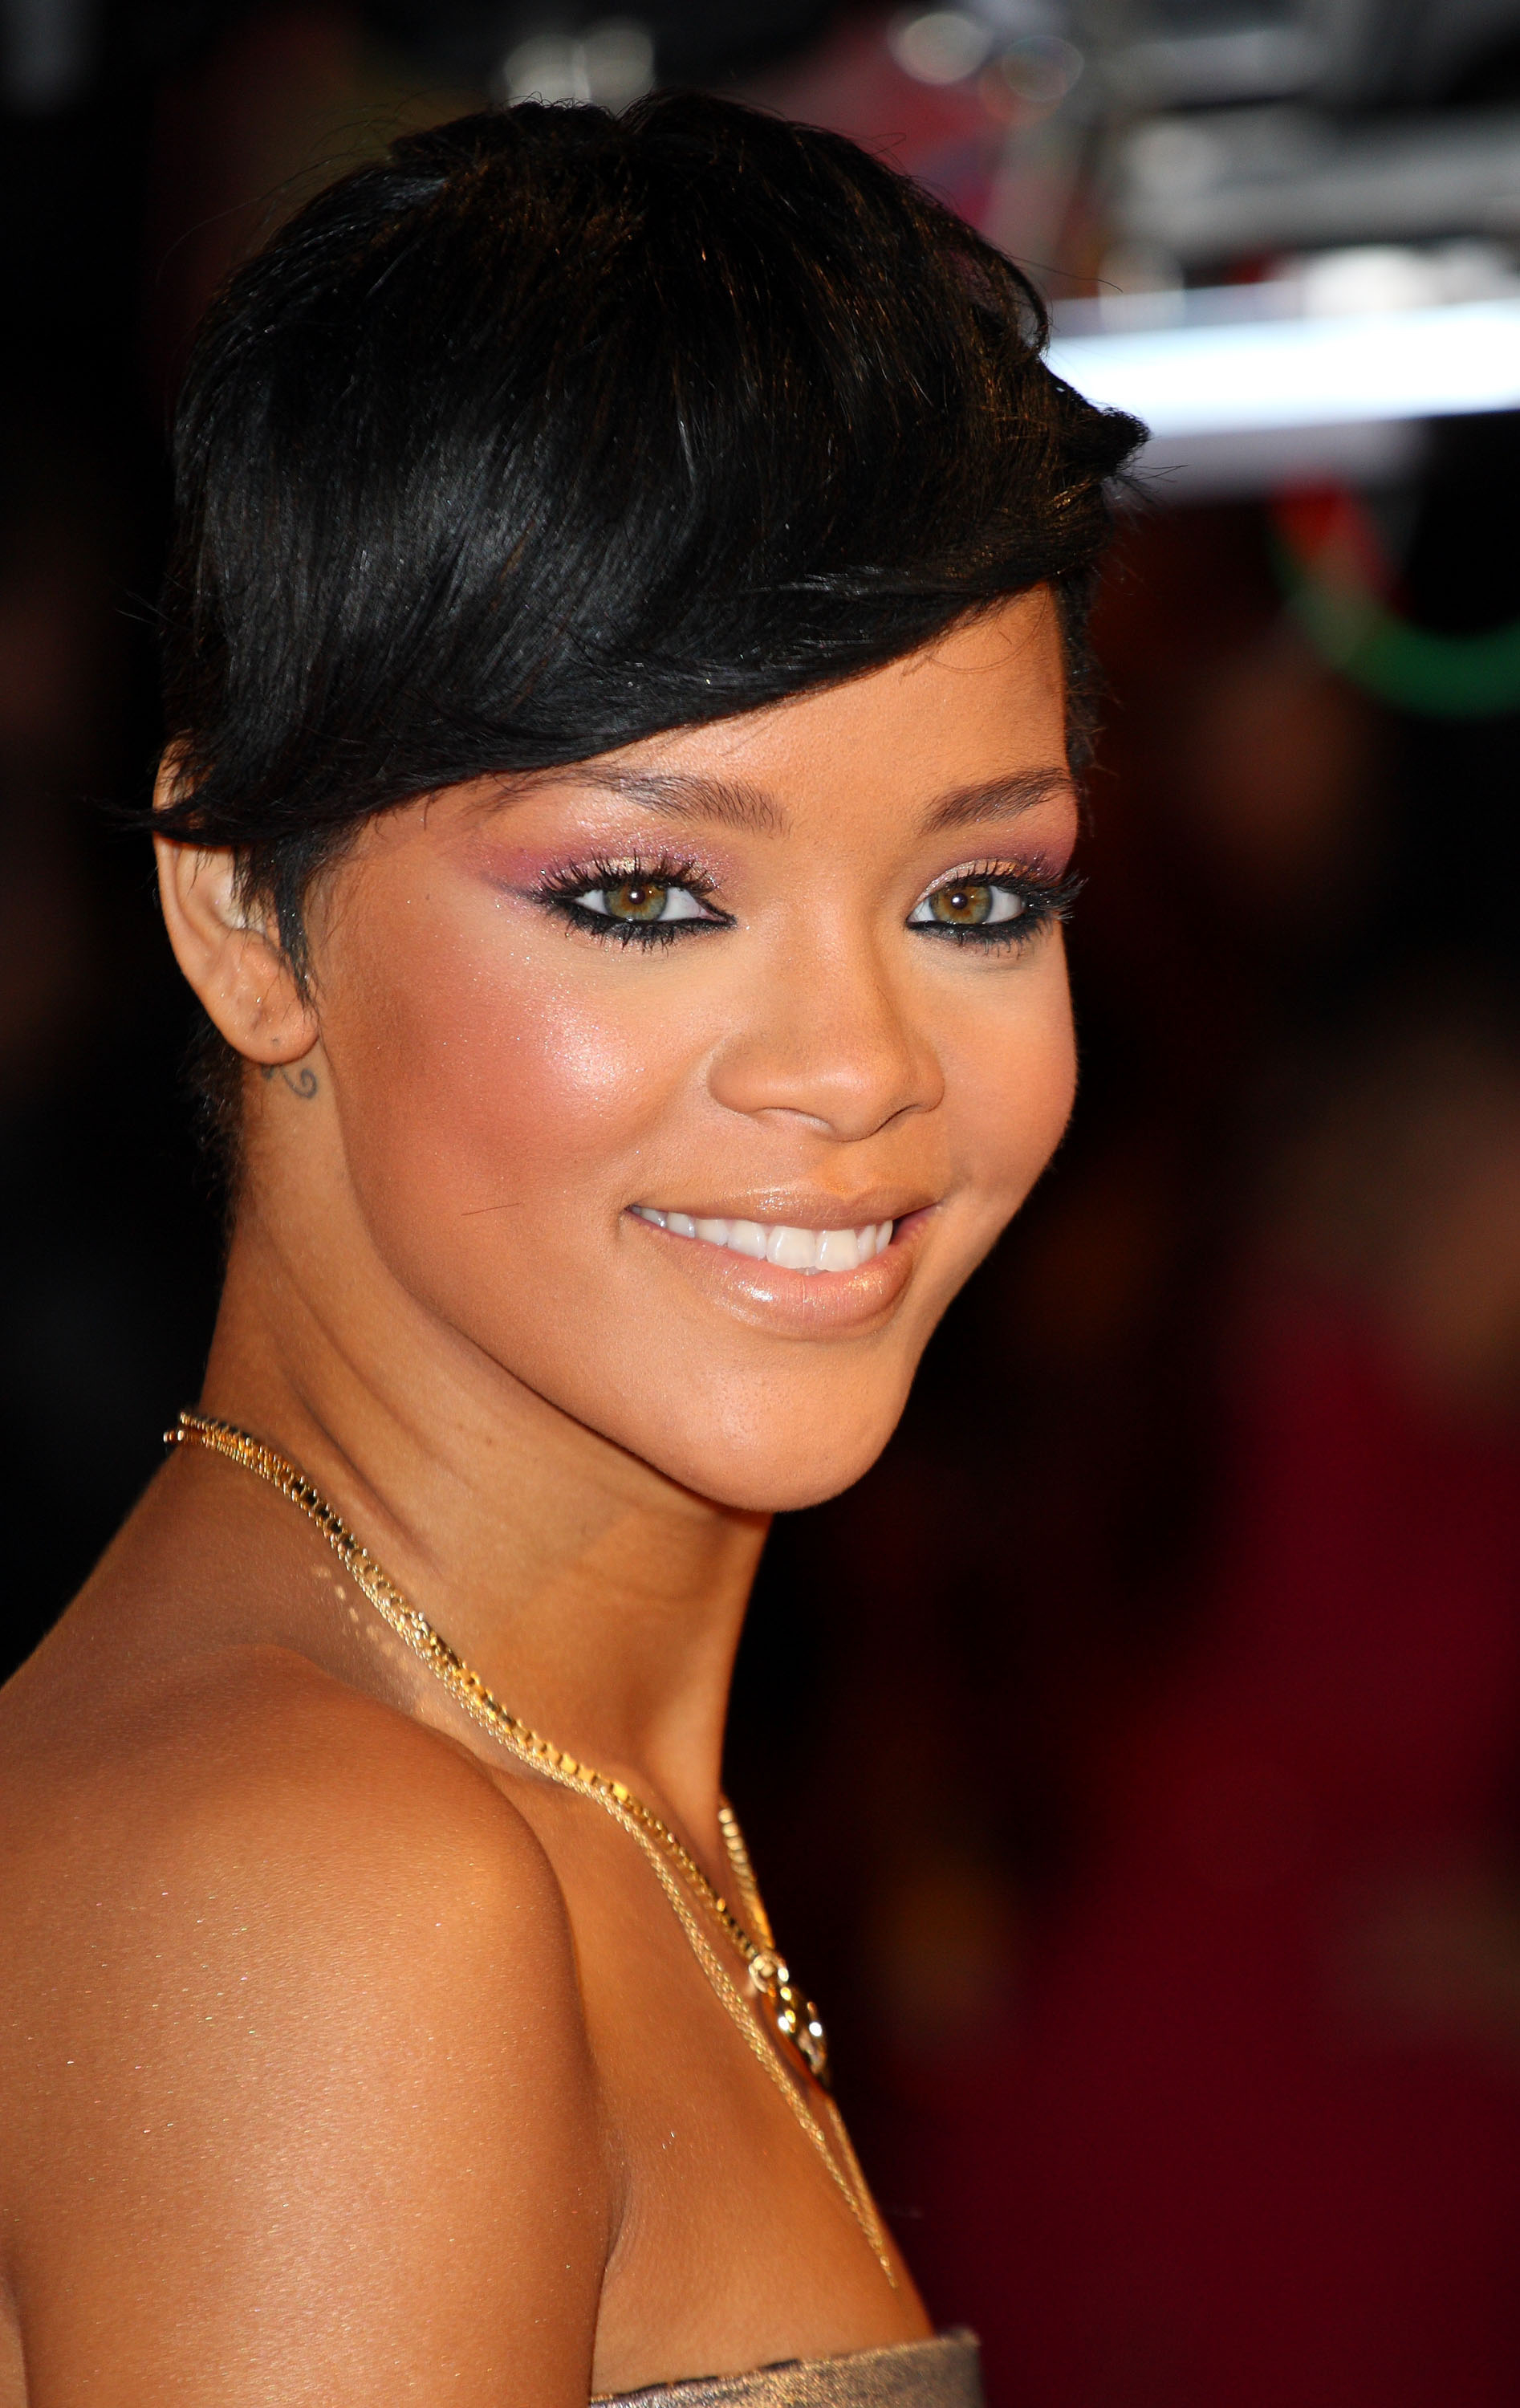 Rihanna is smiling on a red carpet with pale, concealer makeup coated lips, wearing a strapless dress and a gold necklace, with short, styled hair